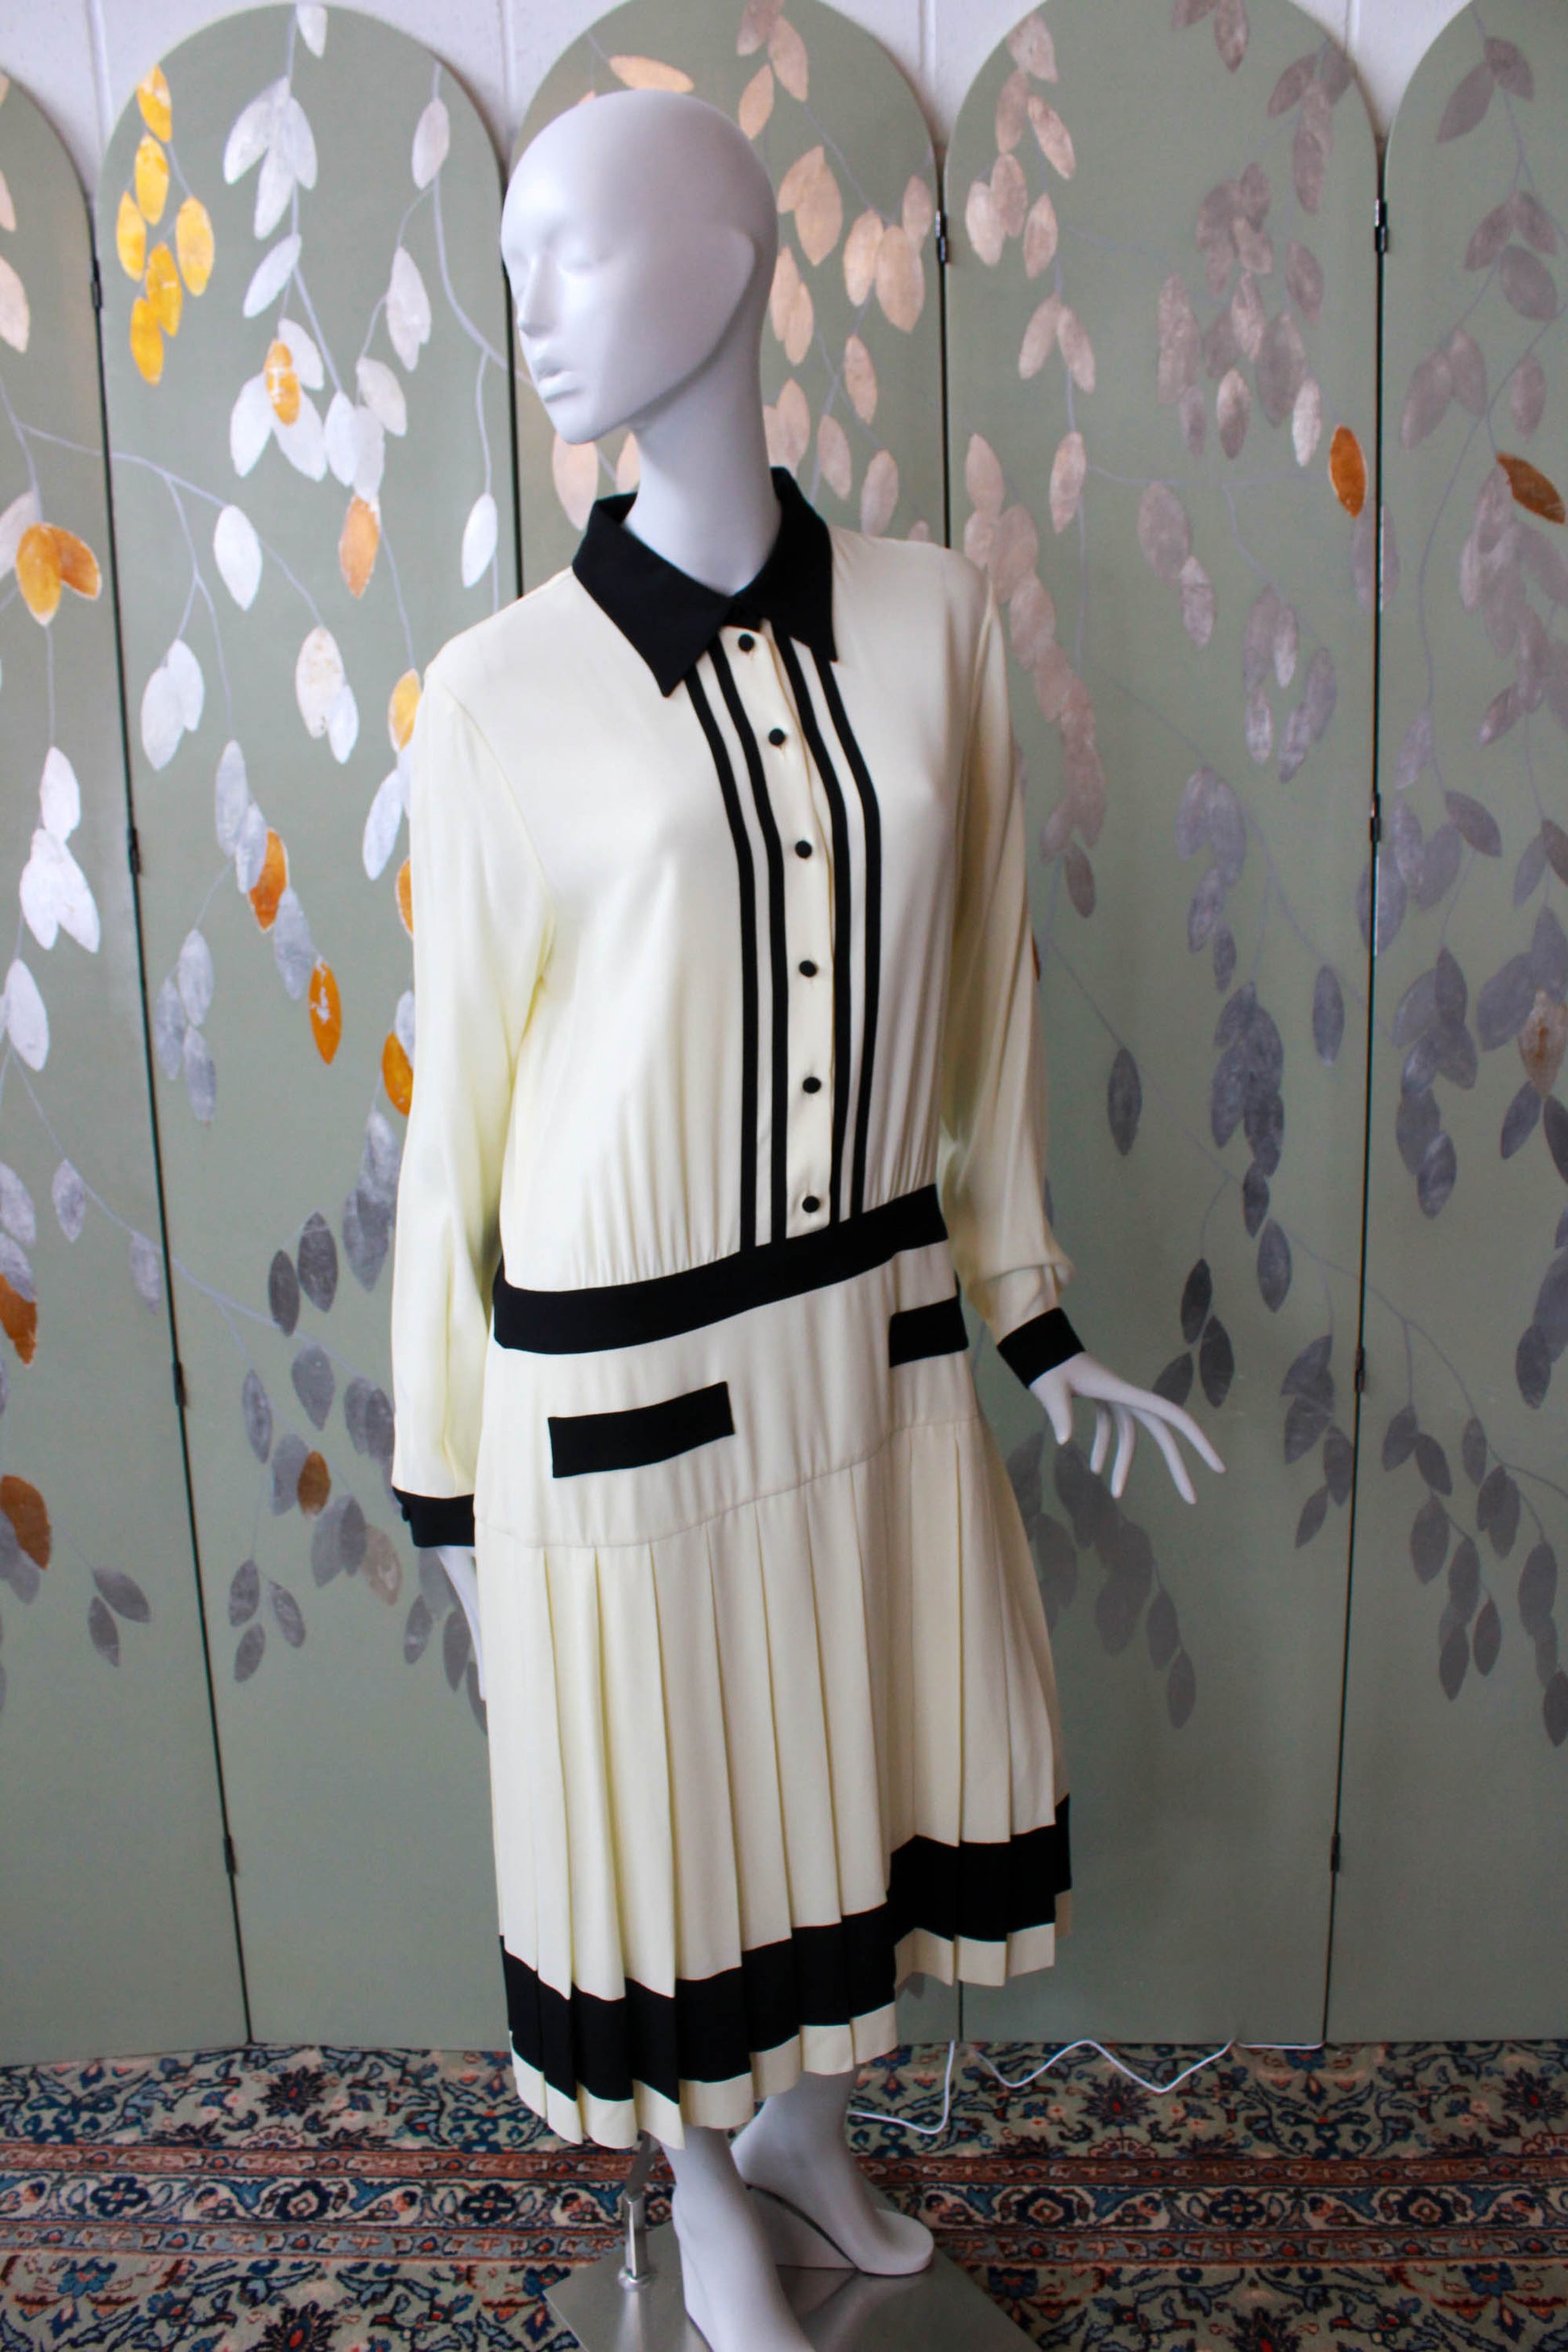 y2k Moschino 1920s style drop waist shirt dress, button up with collar, cream with black contrast bands at waist, pockets, hem, cuffs collar. Pleated skirt, faux pockets